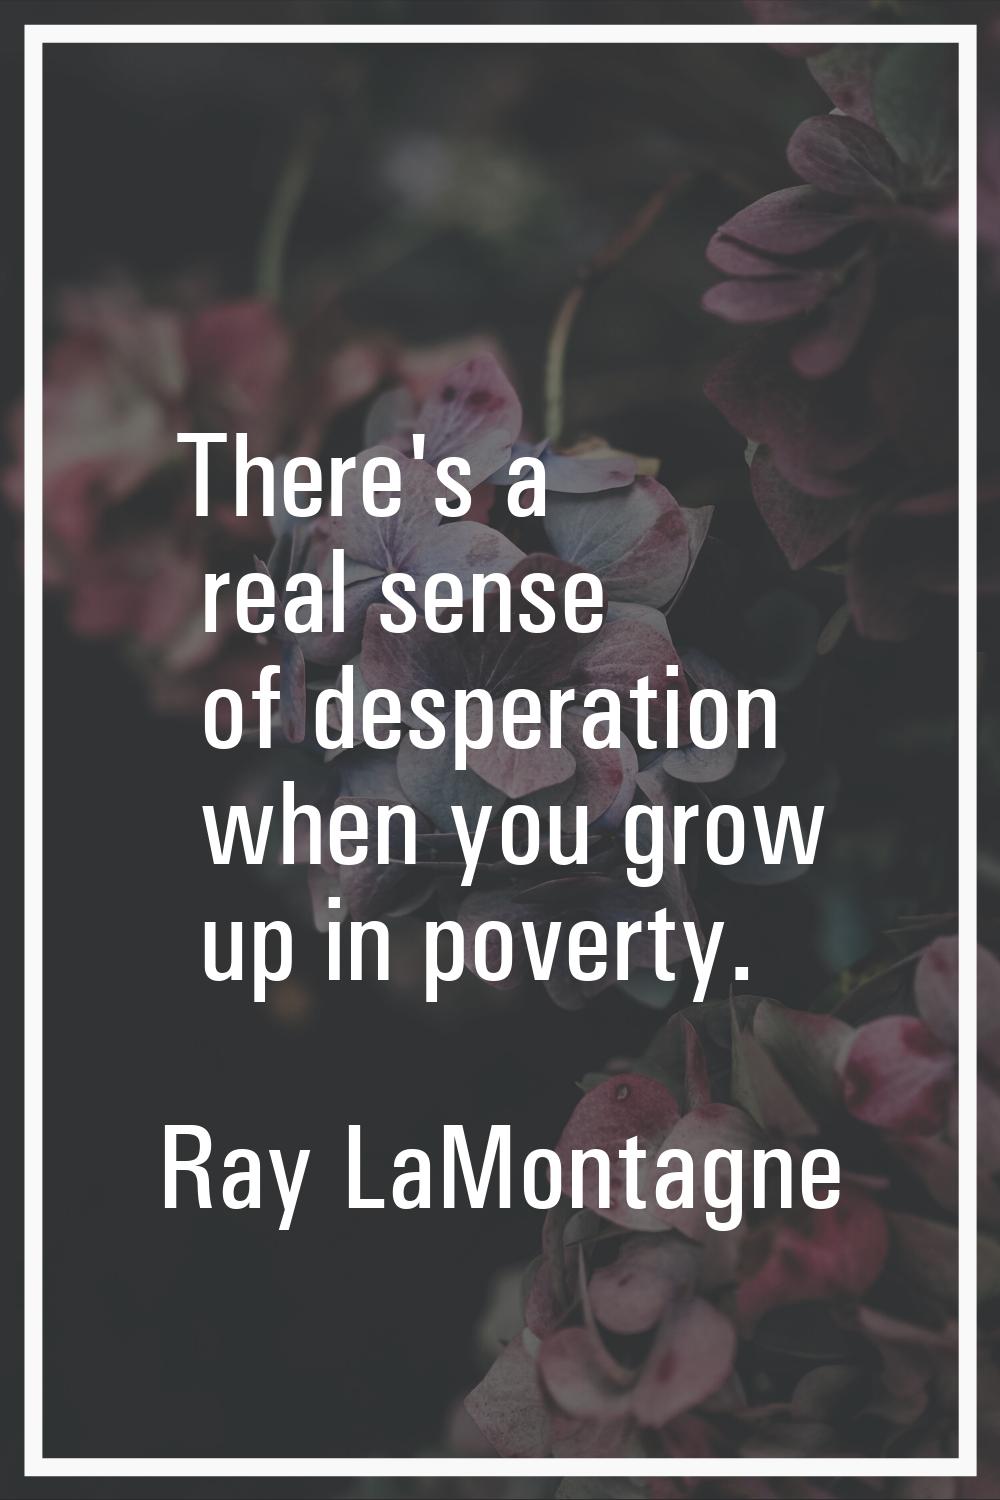 There's a real sense of desperation when you grow up in poverty.